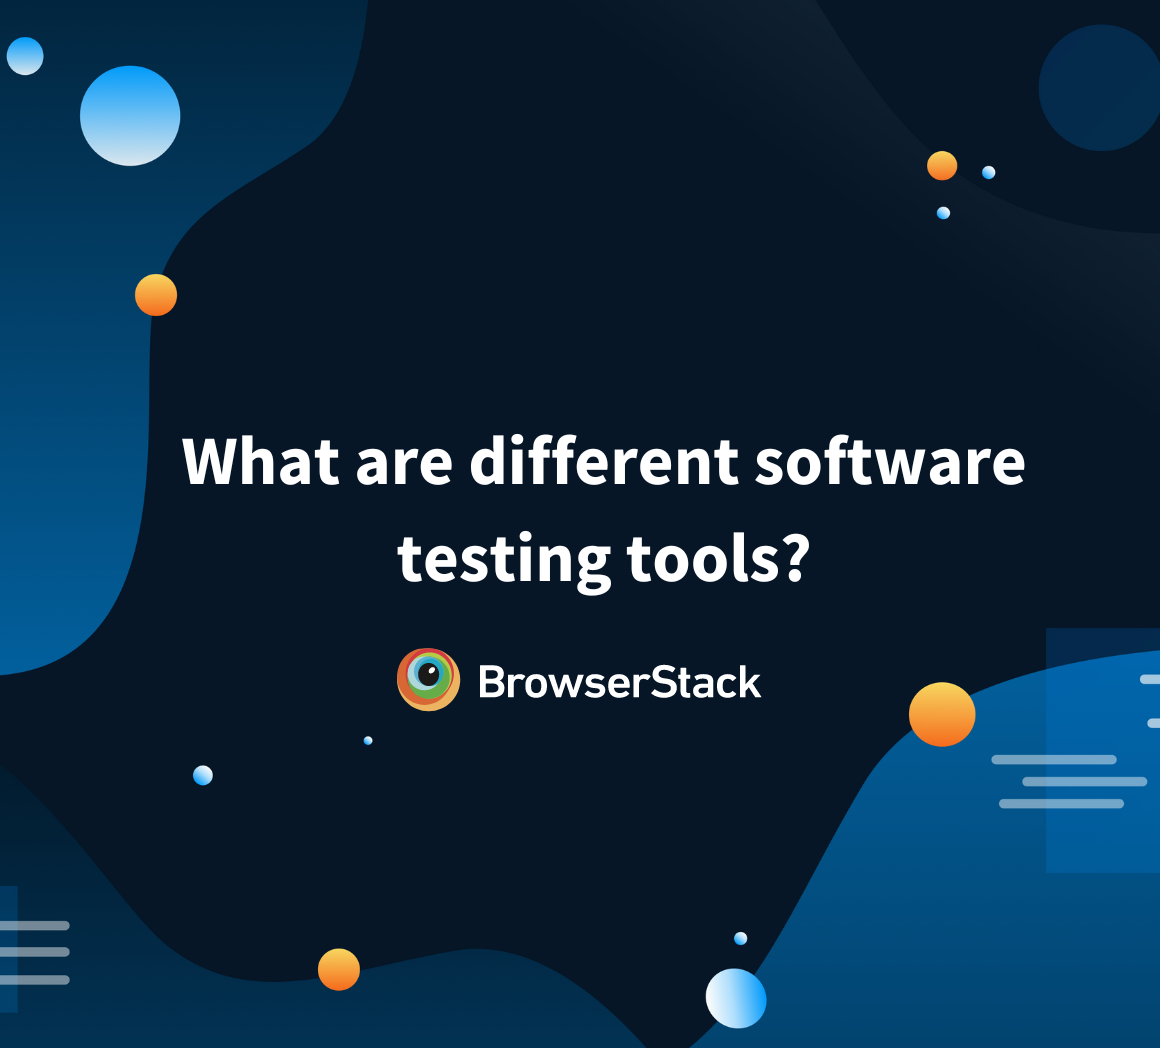 What are different software testing tools